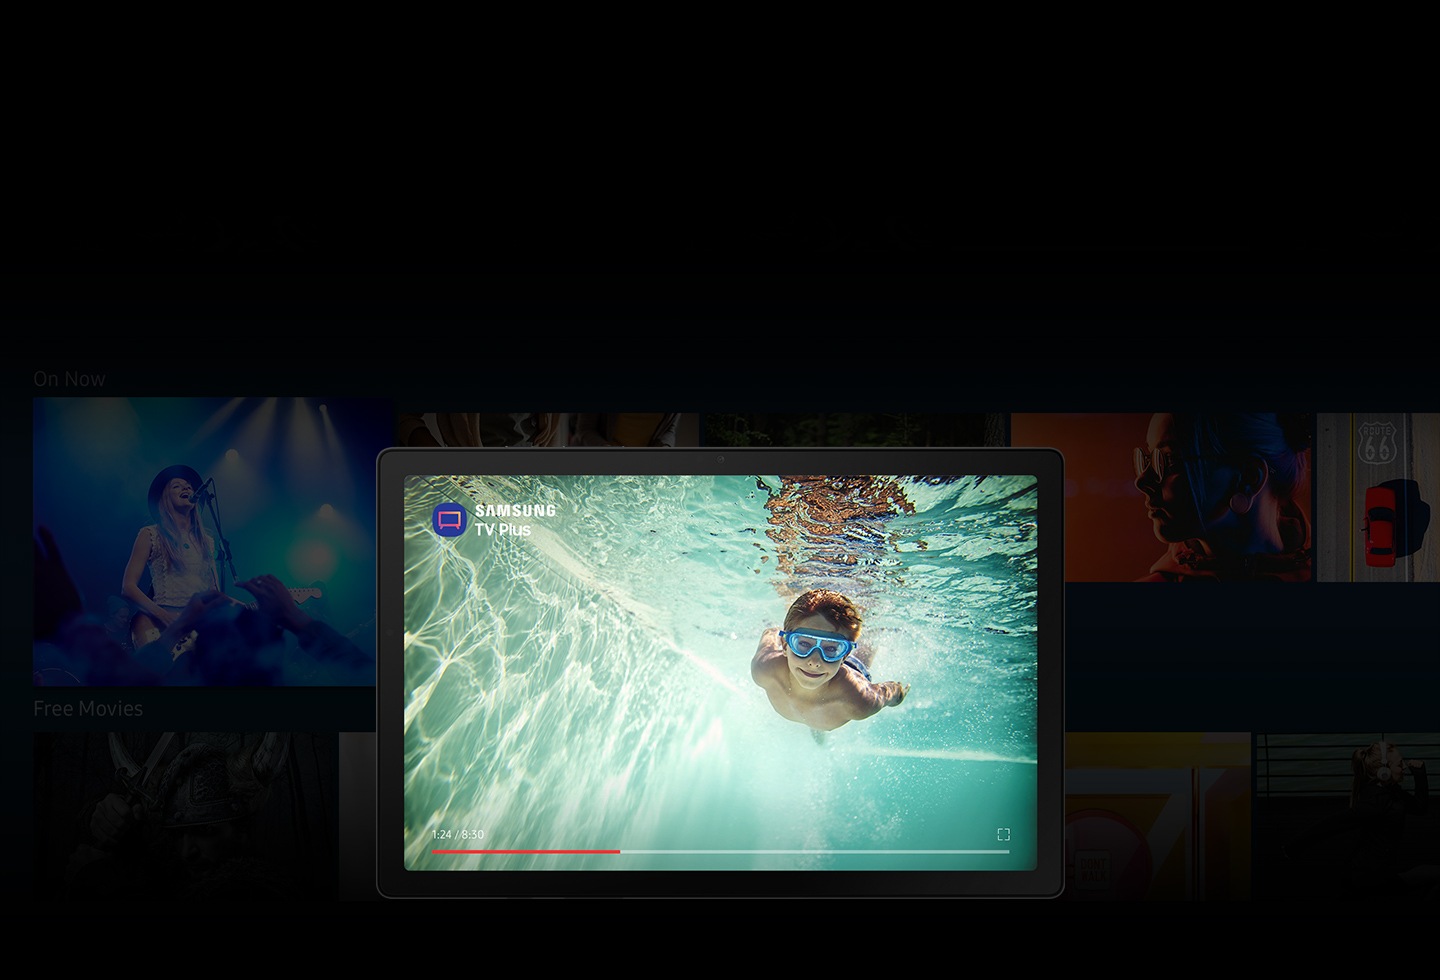 Samsung TV Plus app is open on Galaxy Tab A8. With numerous blurred-out images from TV shows and movies in the background, shown on screen is a boy swimming underwater.